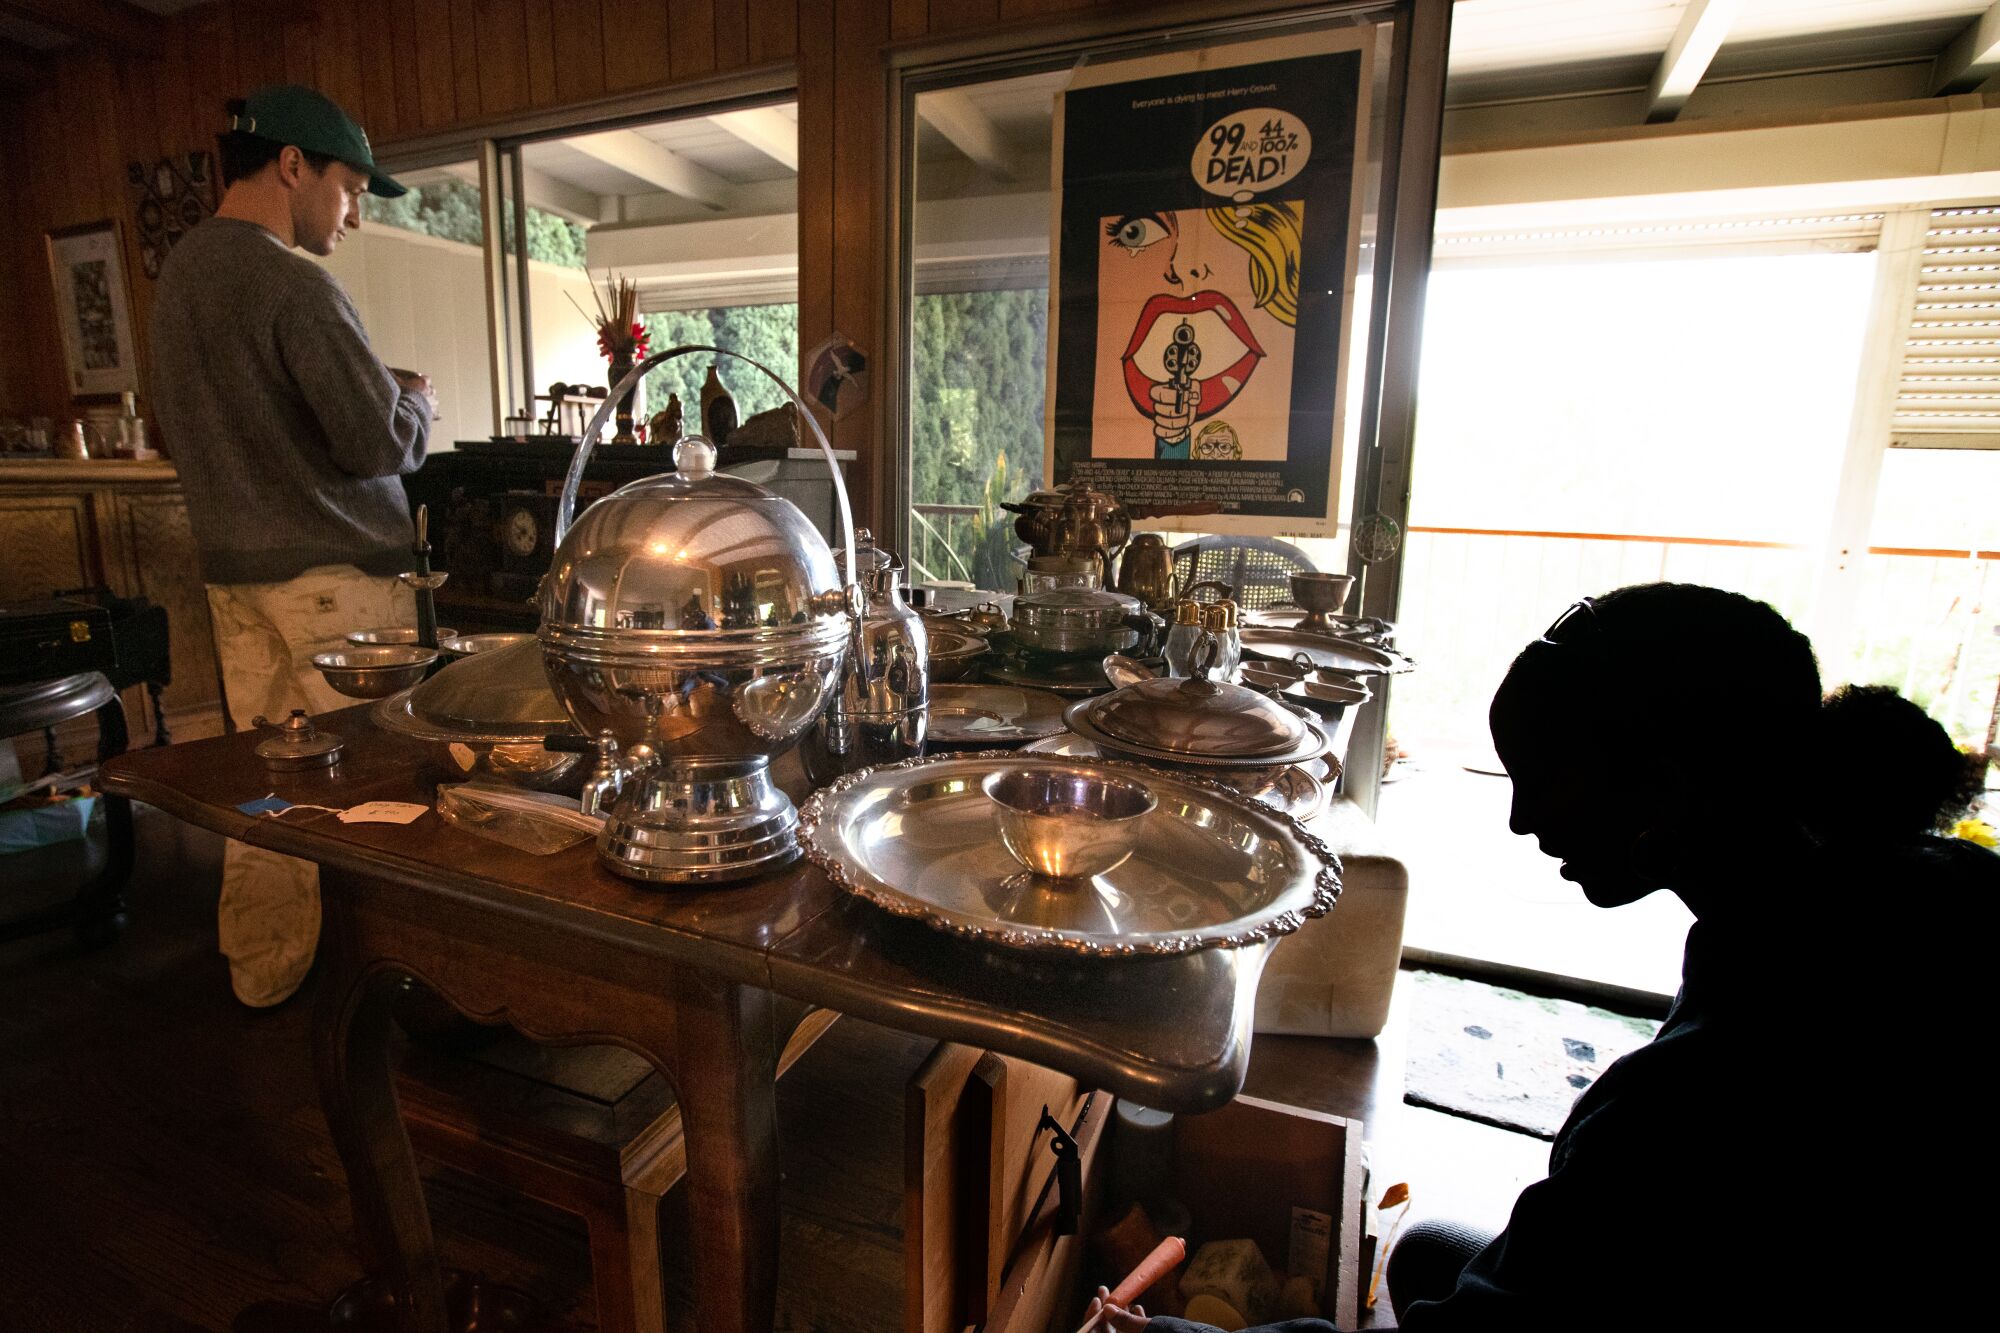 Hannah Masresha looks at items for sale at an estate sale on Alcyona Dr. in Los Angeles.